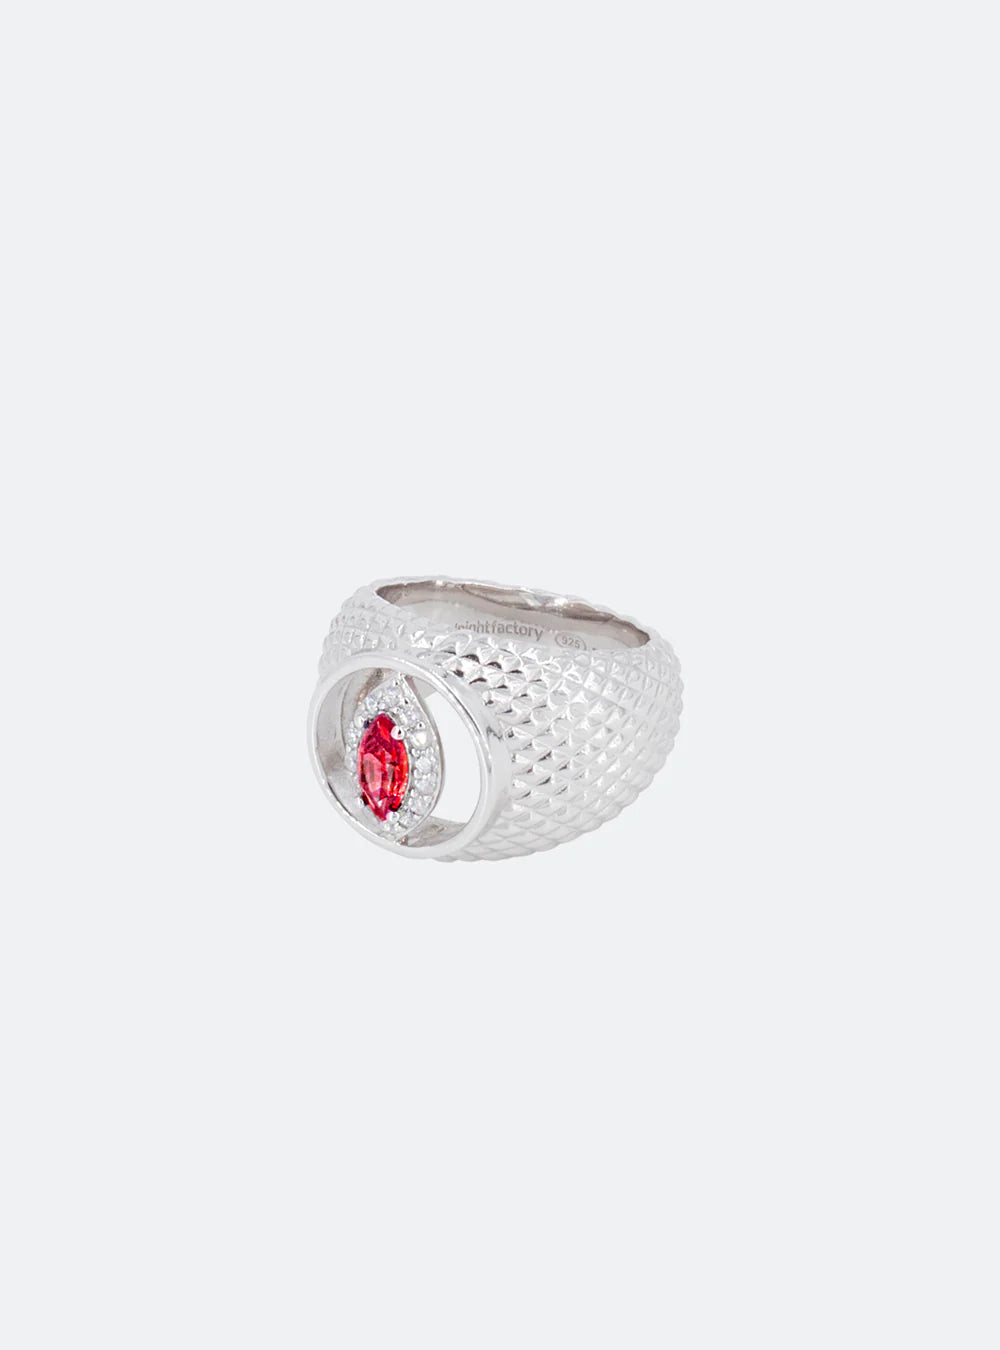 A MIDNIGHTFACTORY Cat-eye cutout Padparadscha cocktail signet ring with a red stone.